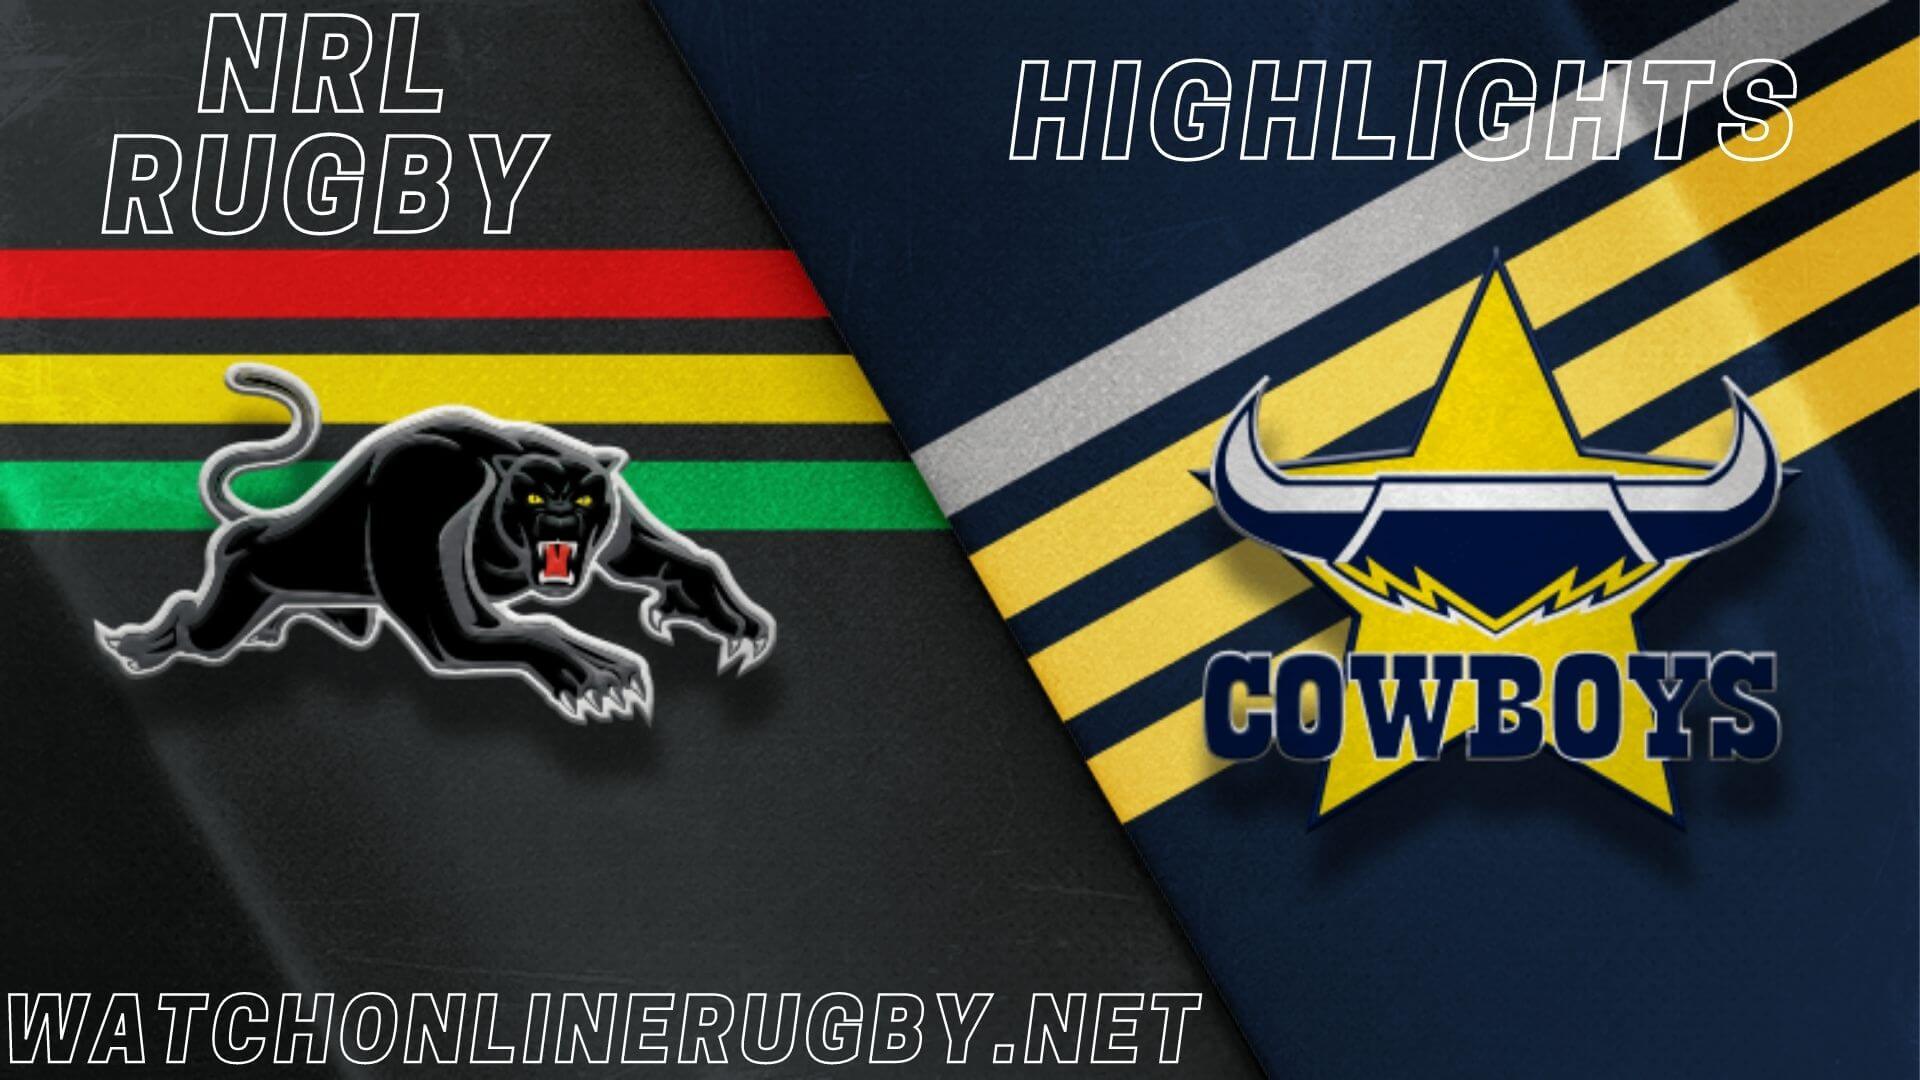 Cowboys Vs Panthers Highlights RD 25 NRL Rugby